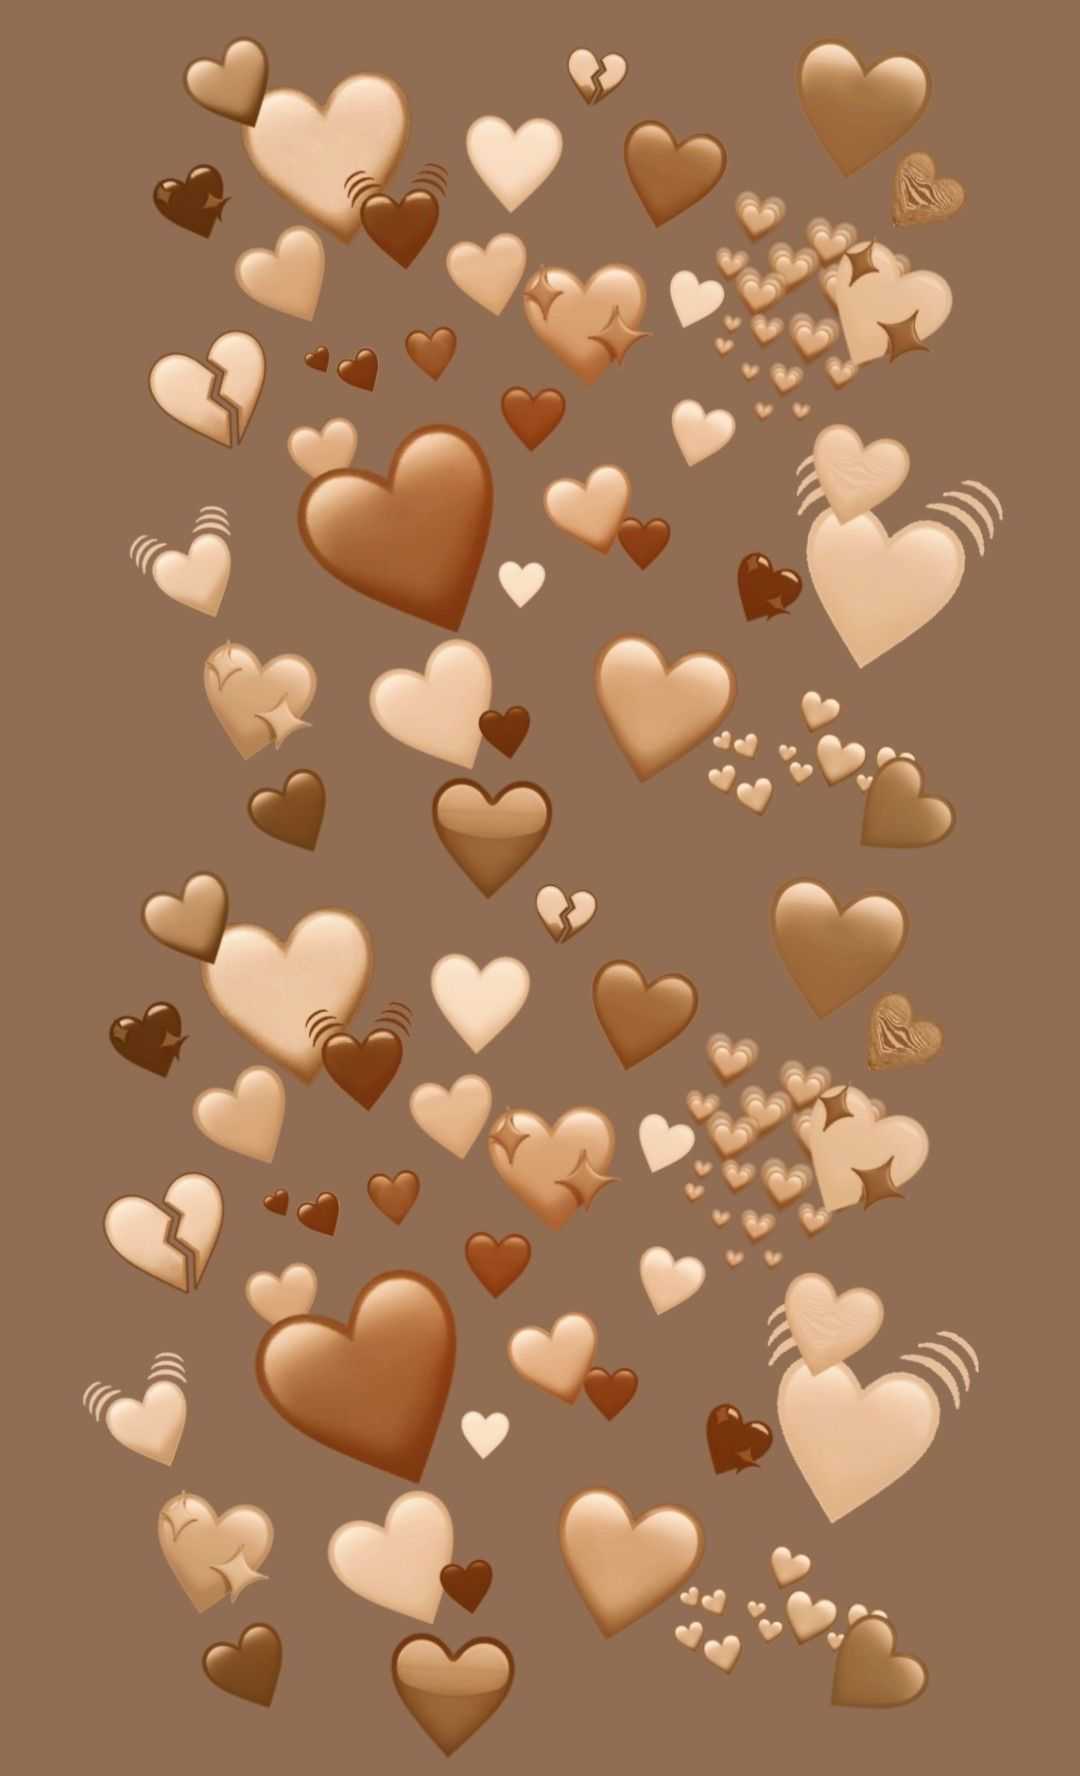 IPhone wallpaper with hearts in light brown colors. - Emoji